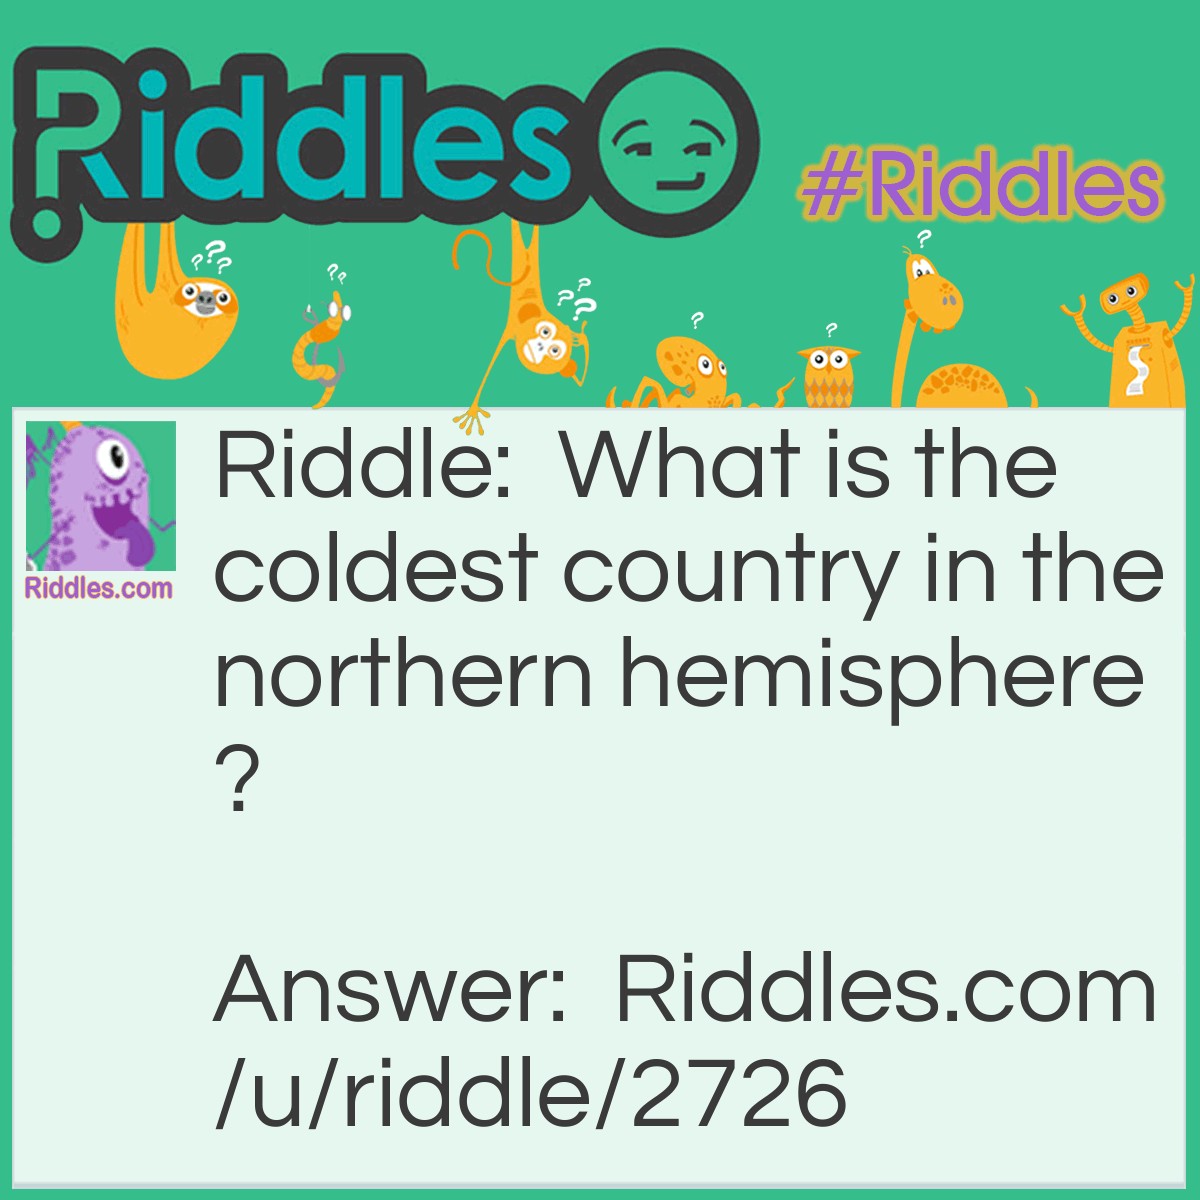 Riddle: What is the coldest country in the northern hemisphere? Answer: Iceland